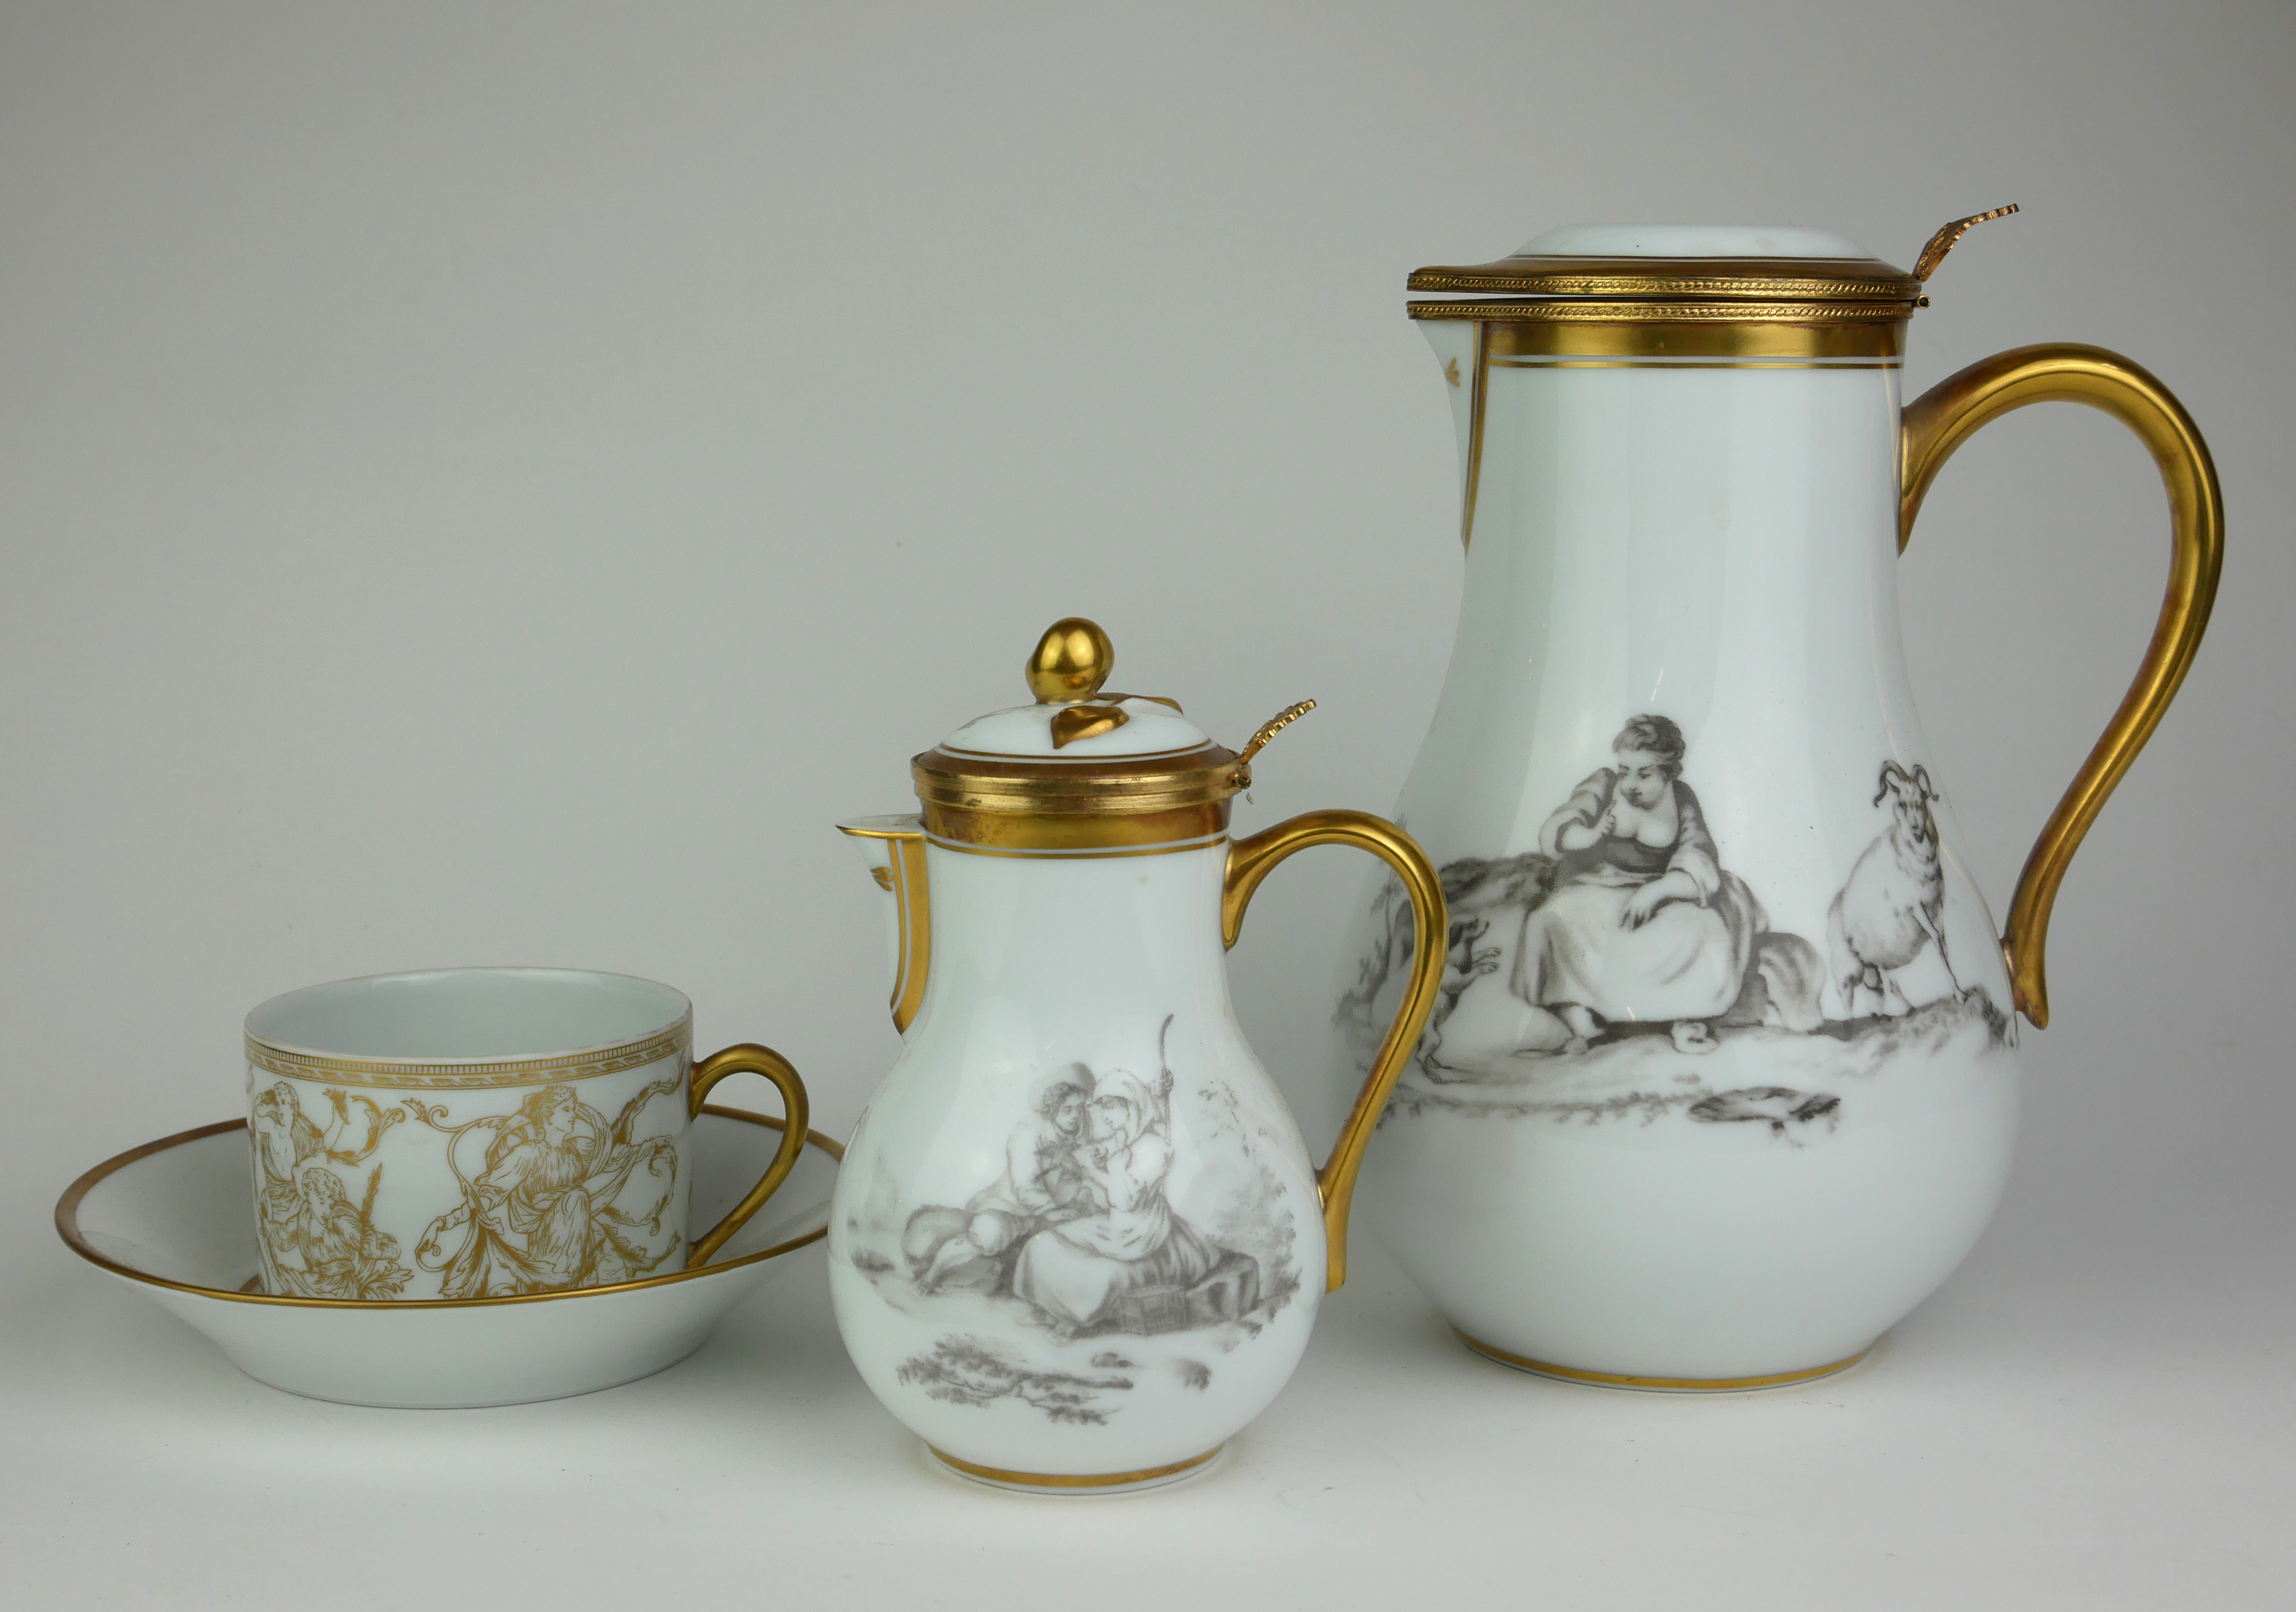 LIMOGES, A 20TH CENTURY FRENCH PORCELAIN HOT WATER JUG In 'Pastorale' pattern, 18th Century style,